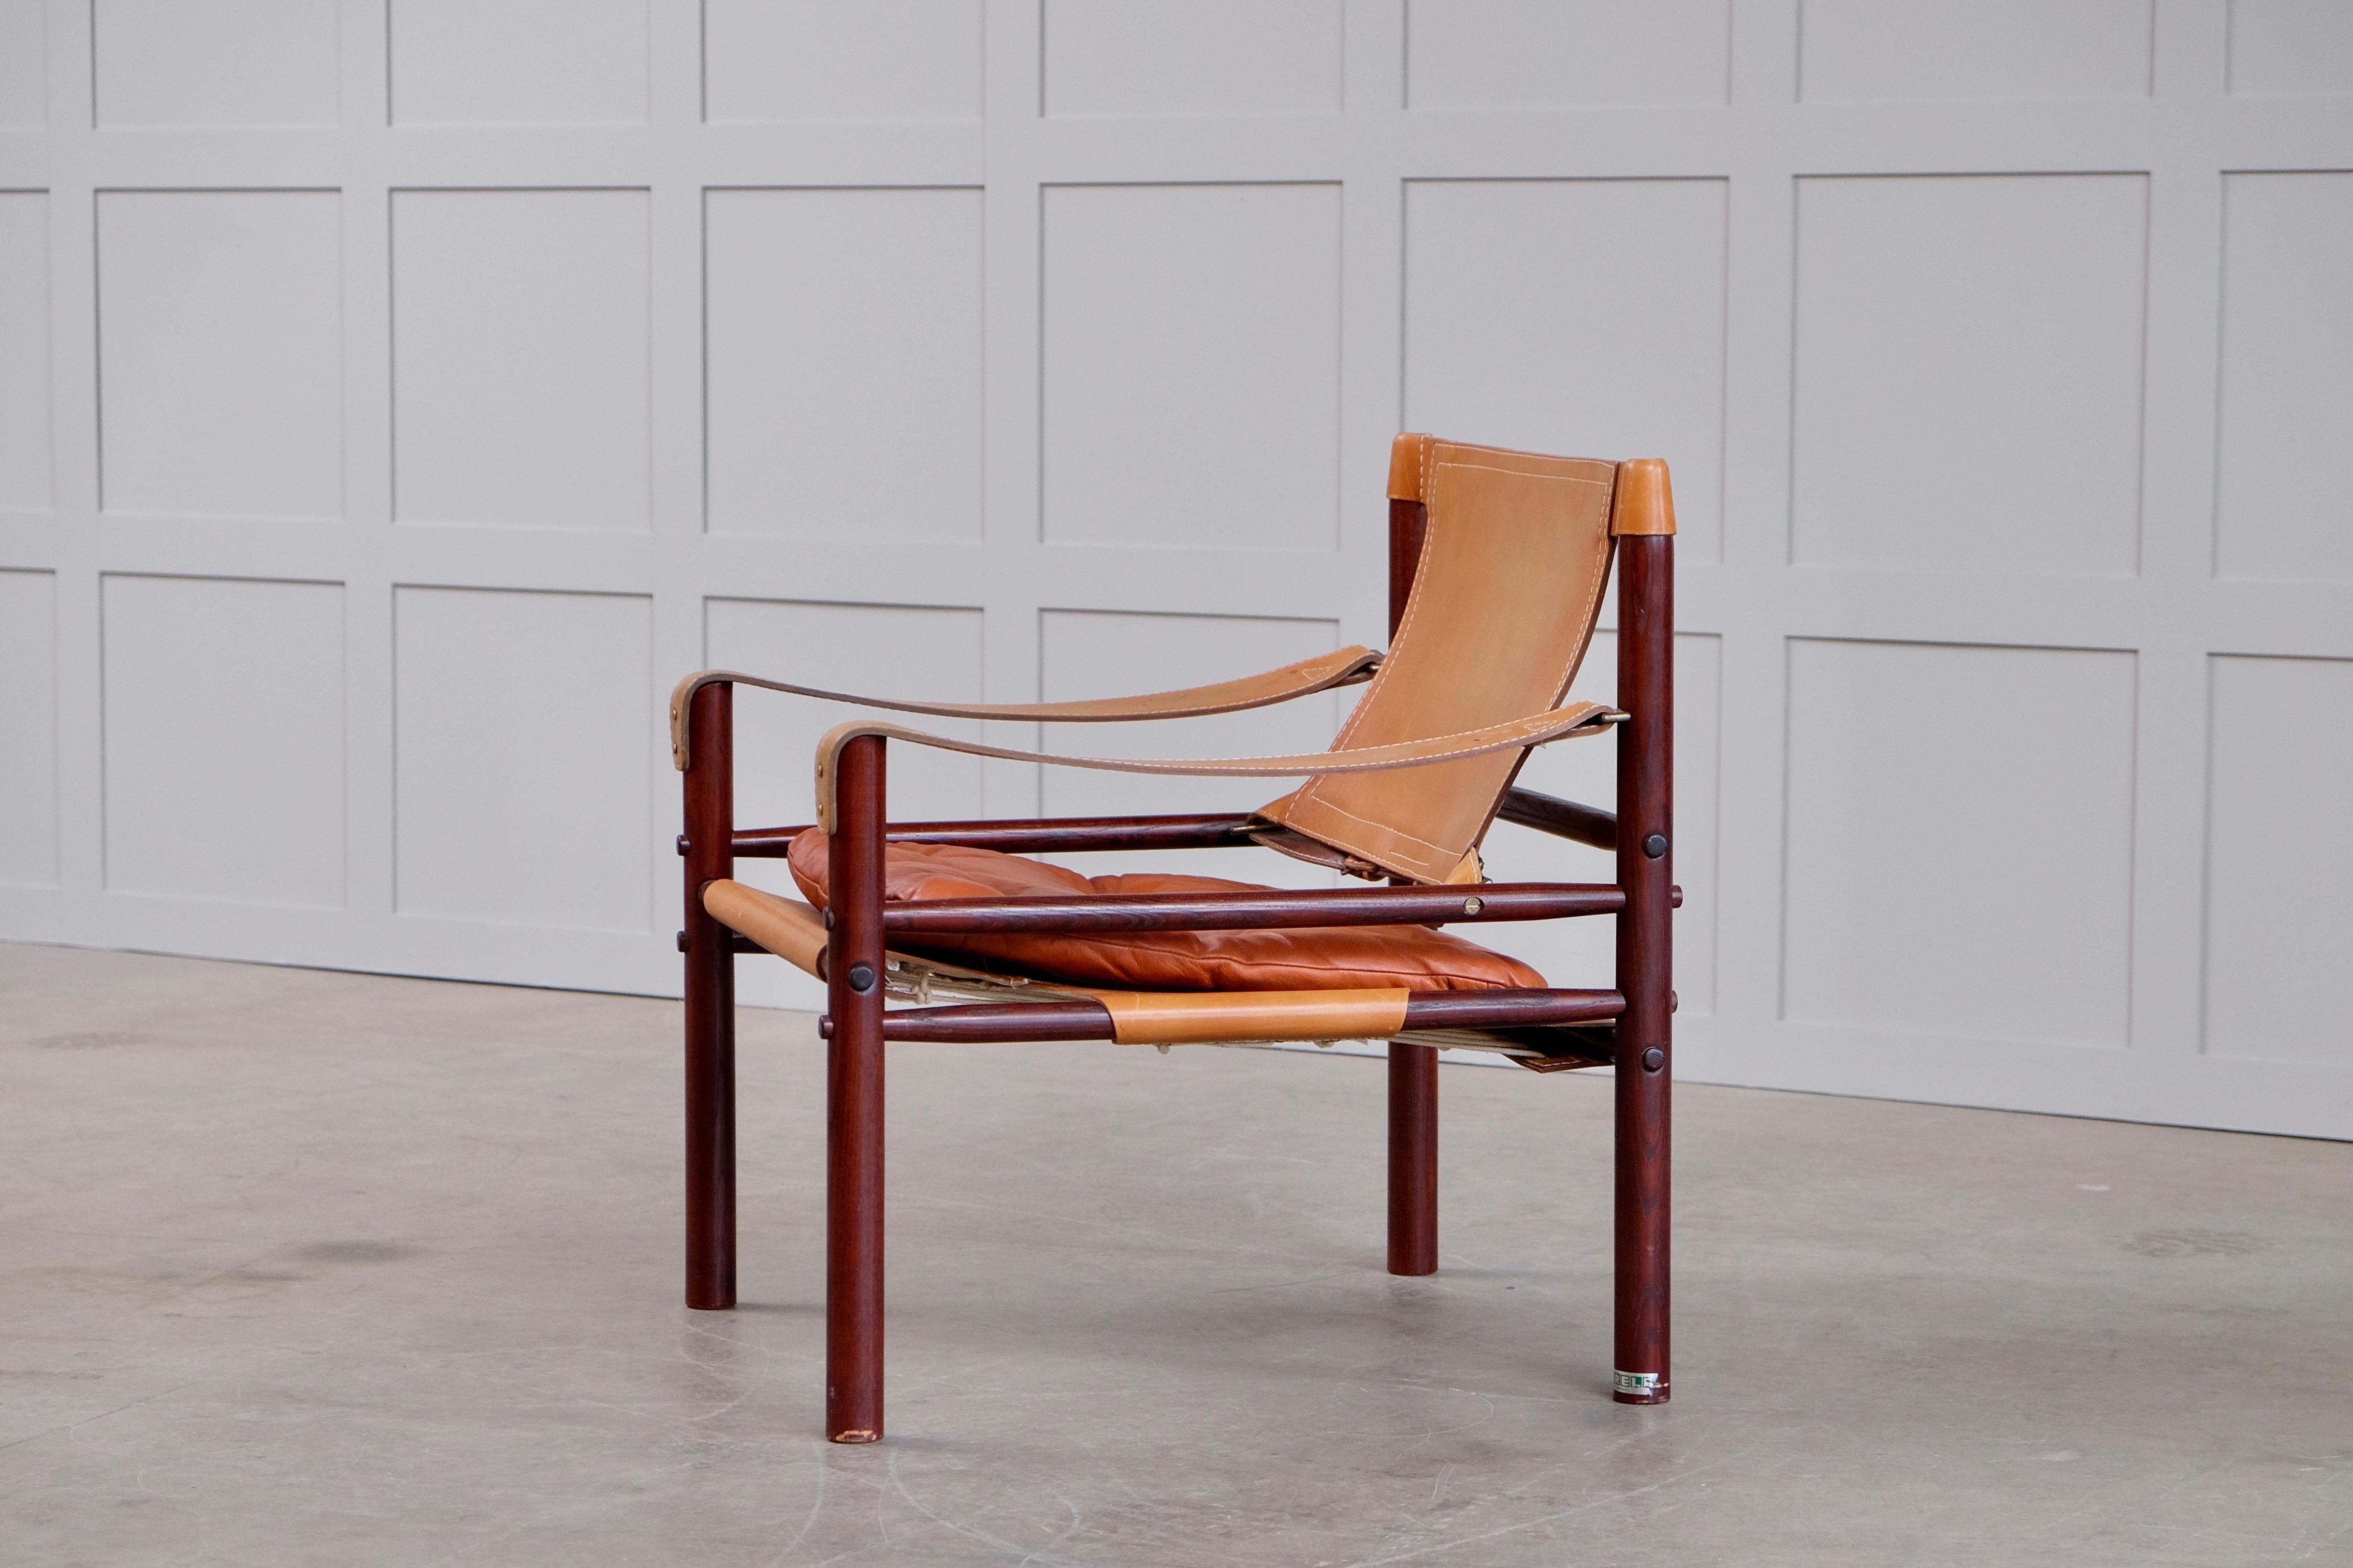 Lovely safari chair or easy chair in leather and beech wood frame. Designed by Arne Norell, 1964, produced by Arne Norell AB in Aneby, Sweden, 1970s.

 